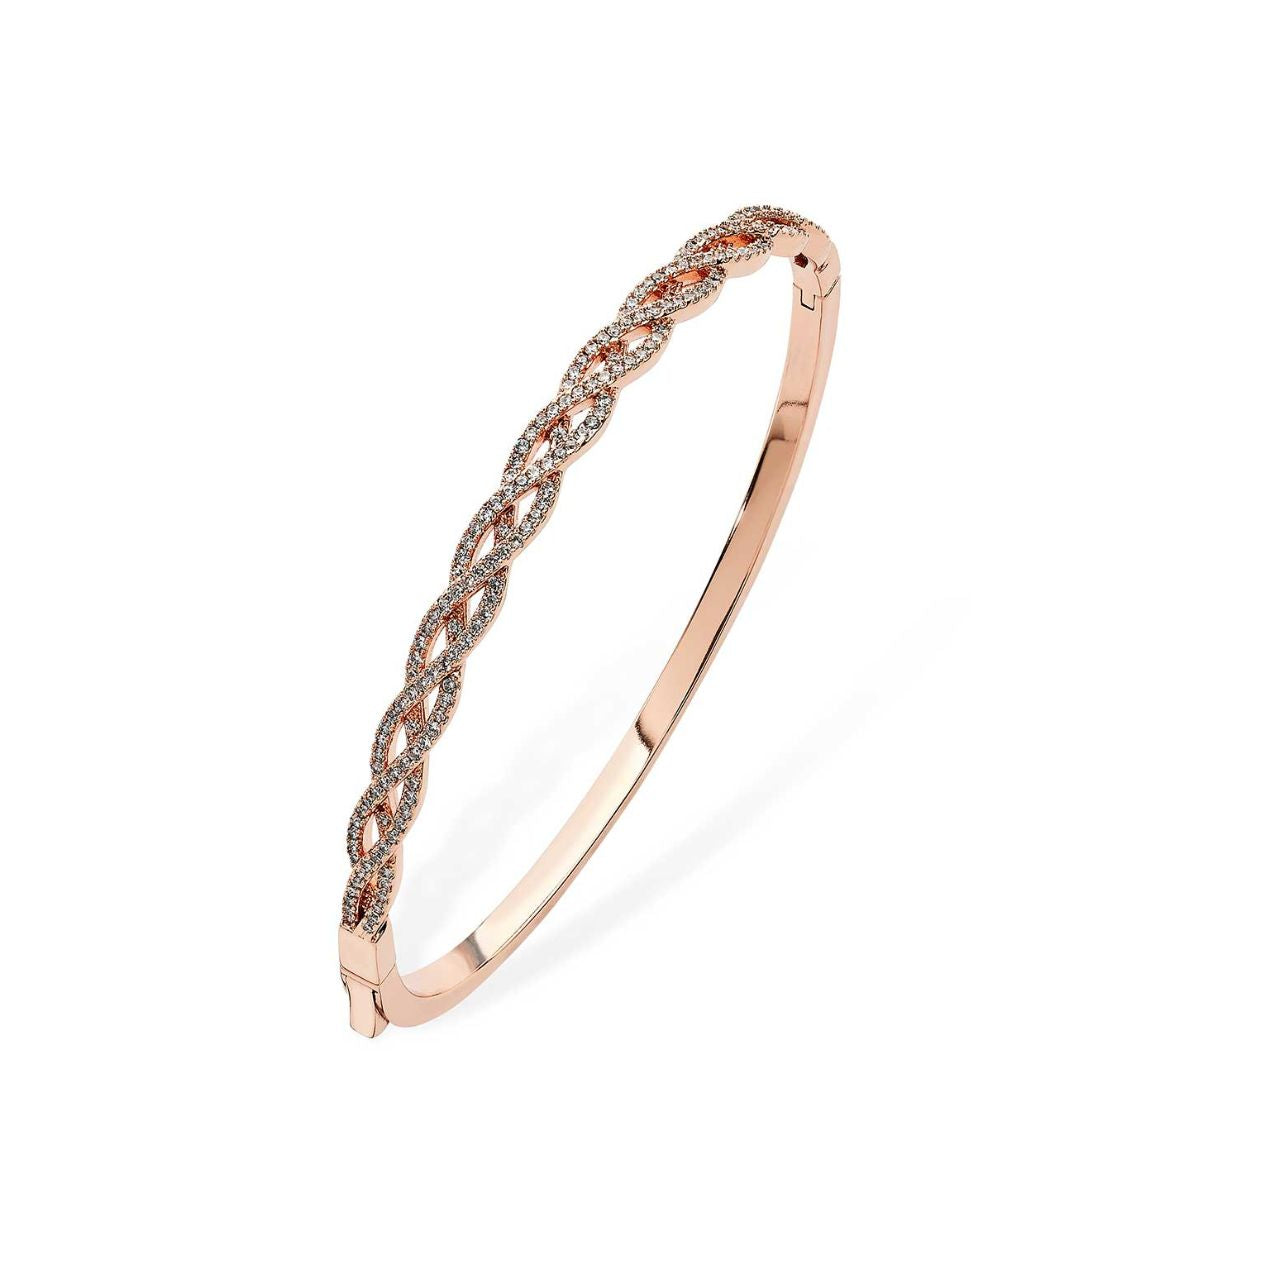 Adorn your wrist with this beautiful bangle that comes in Silver or Rose Gold. This piece has interlinking waves of crystal ﬂowing through the design. This bangles can be worn as a single piece or stacked. The clasp is on a hinge and gives a clean seamless look to the bangle.